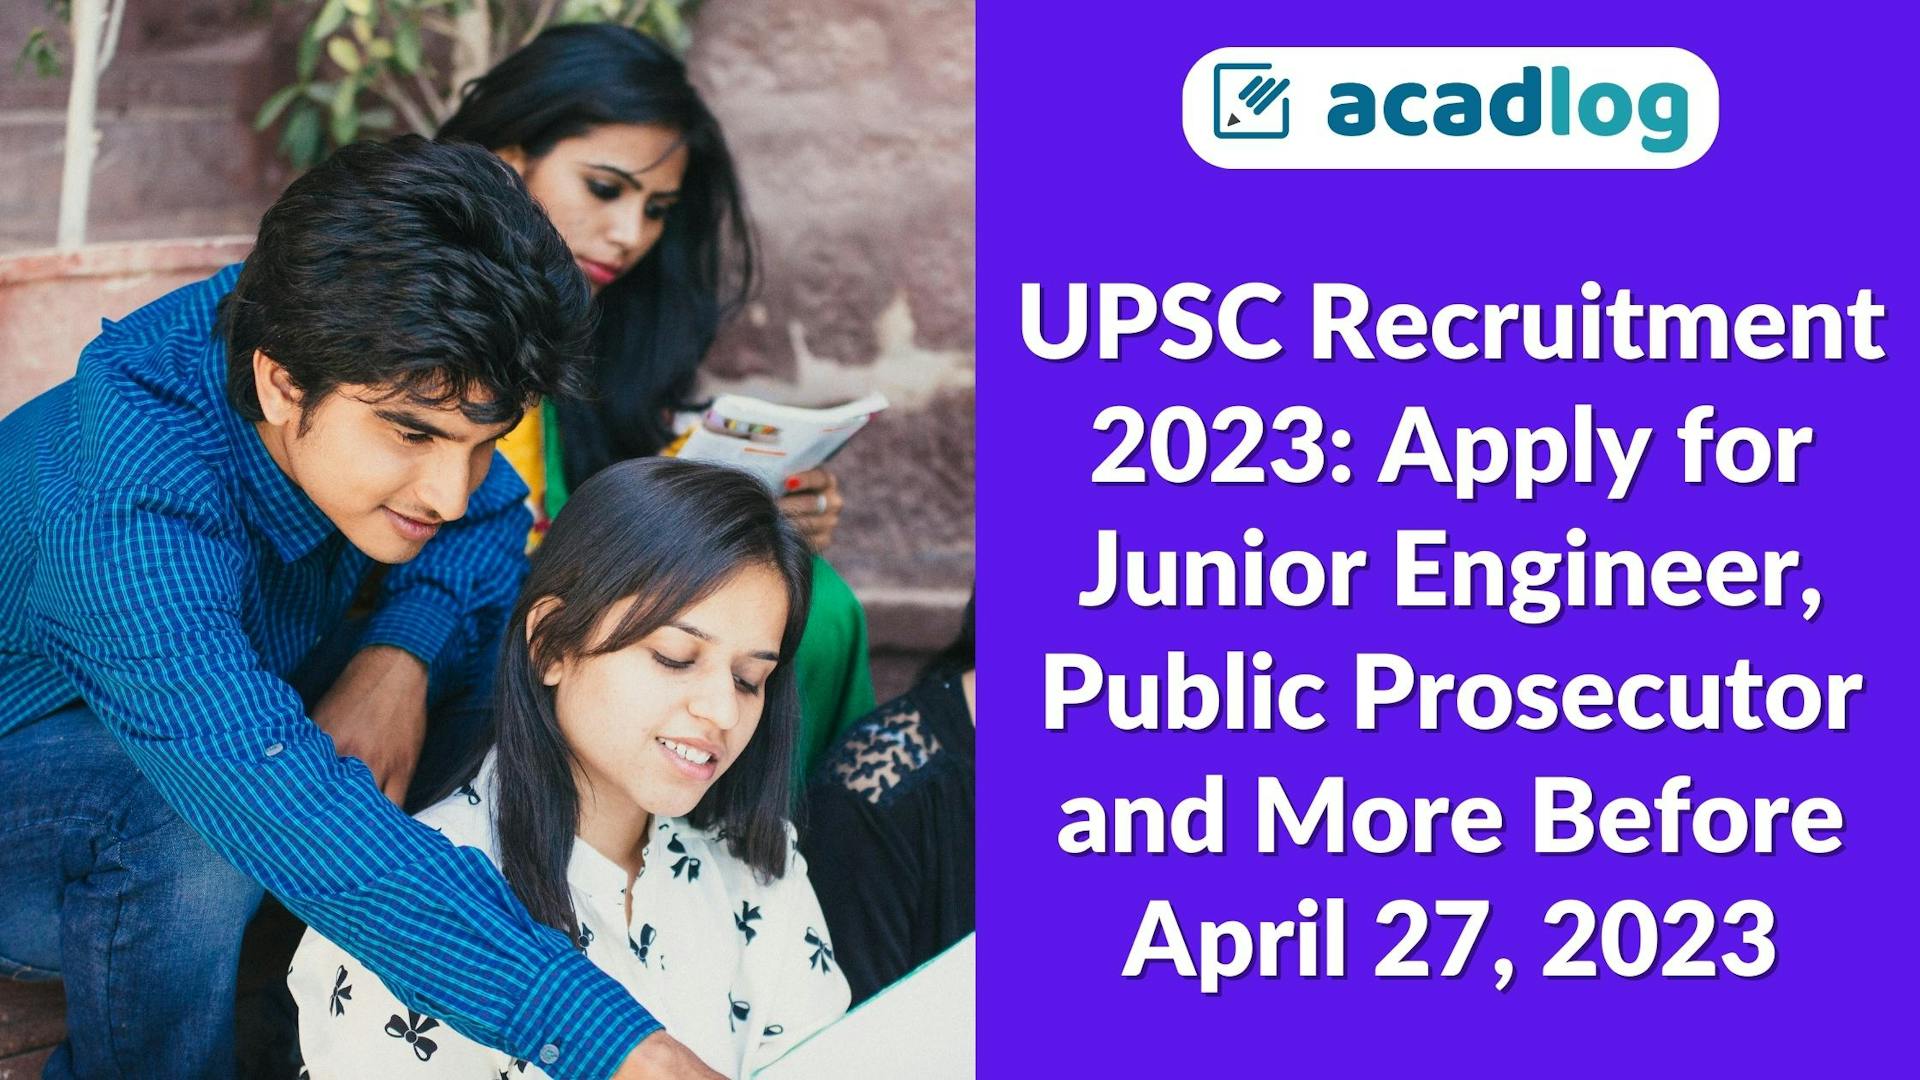 UPSC Recruitment 2023: Apply for Junior Engineer, Public Prosecutor and More